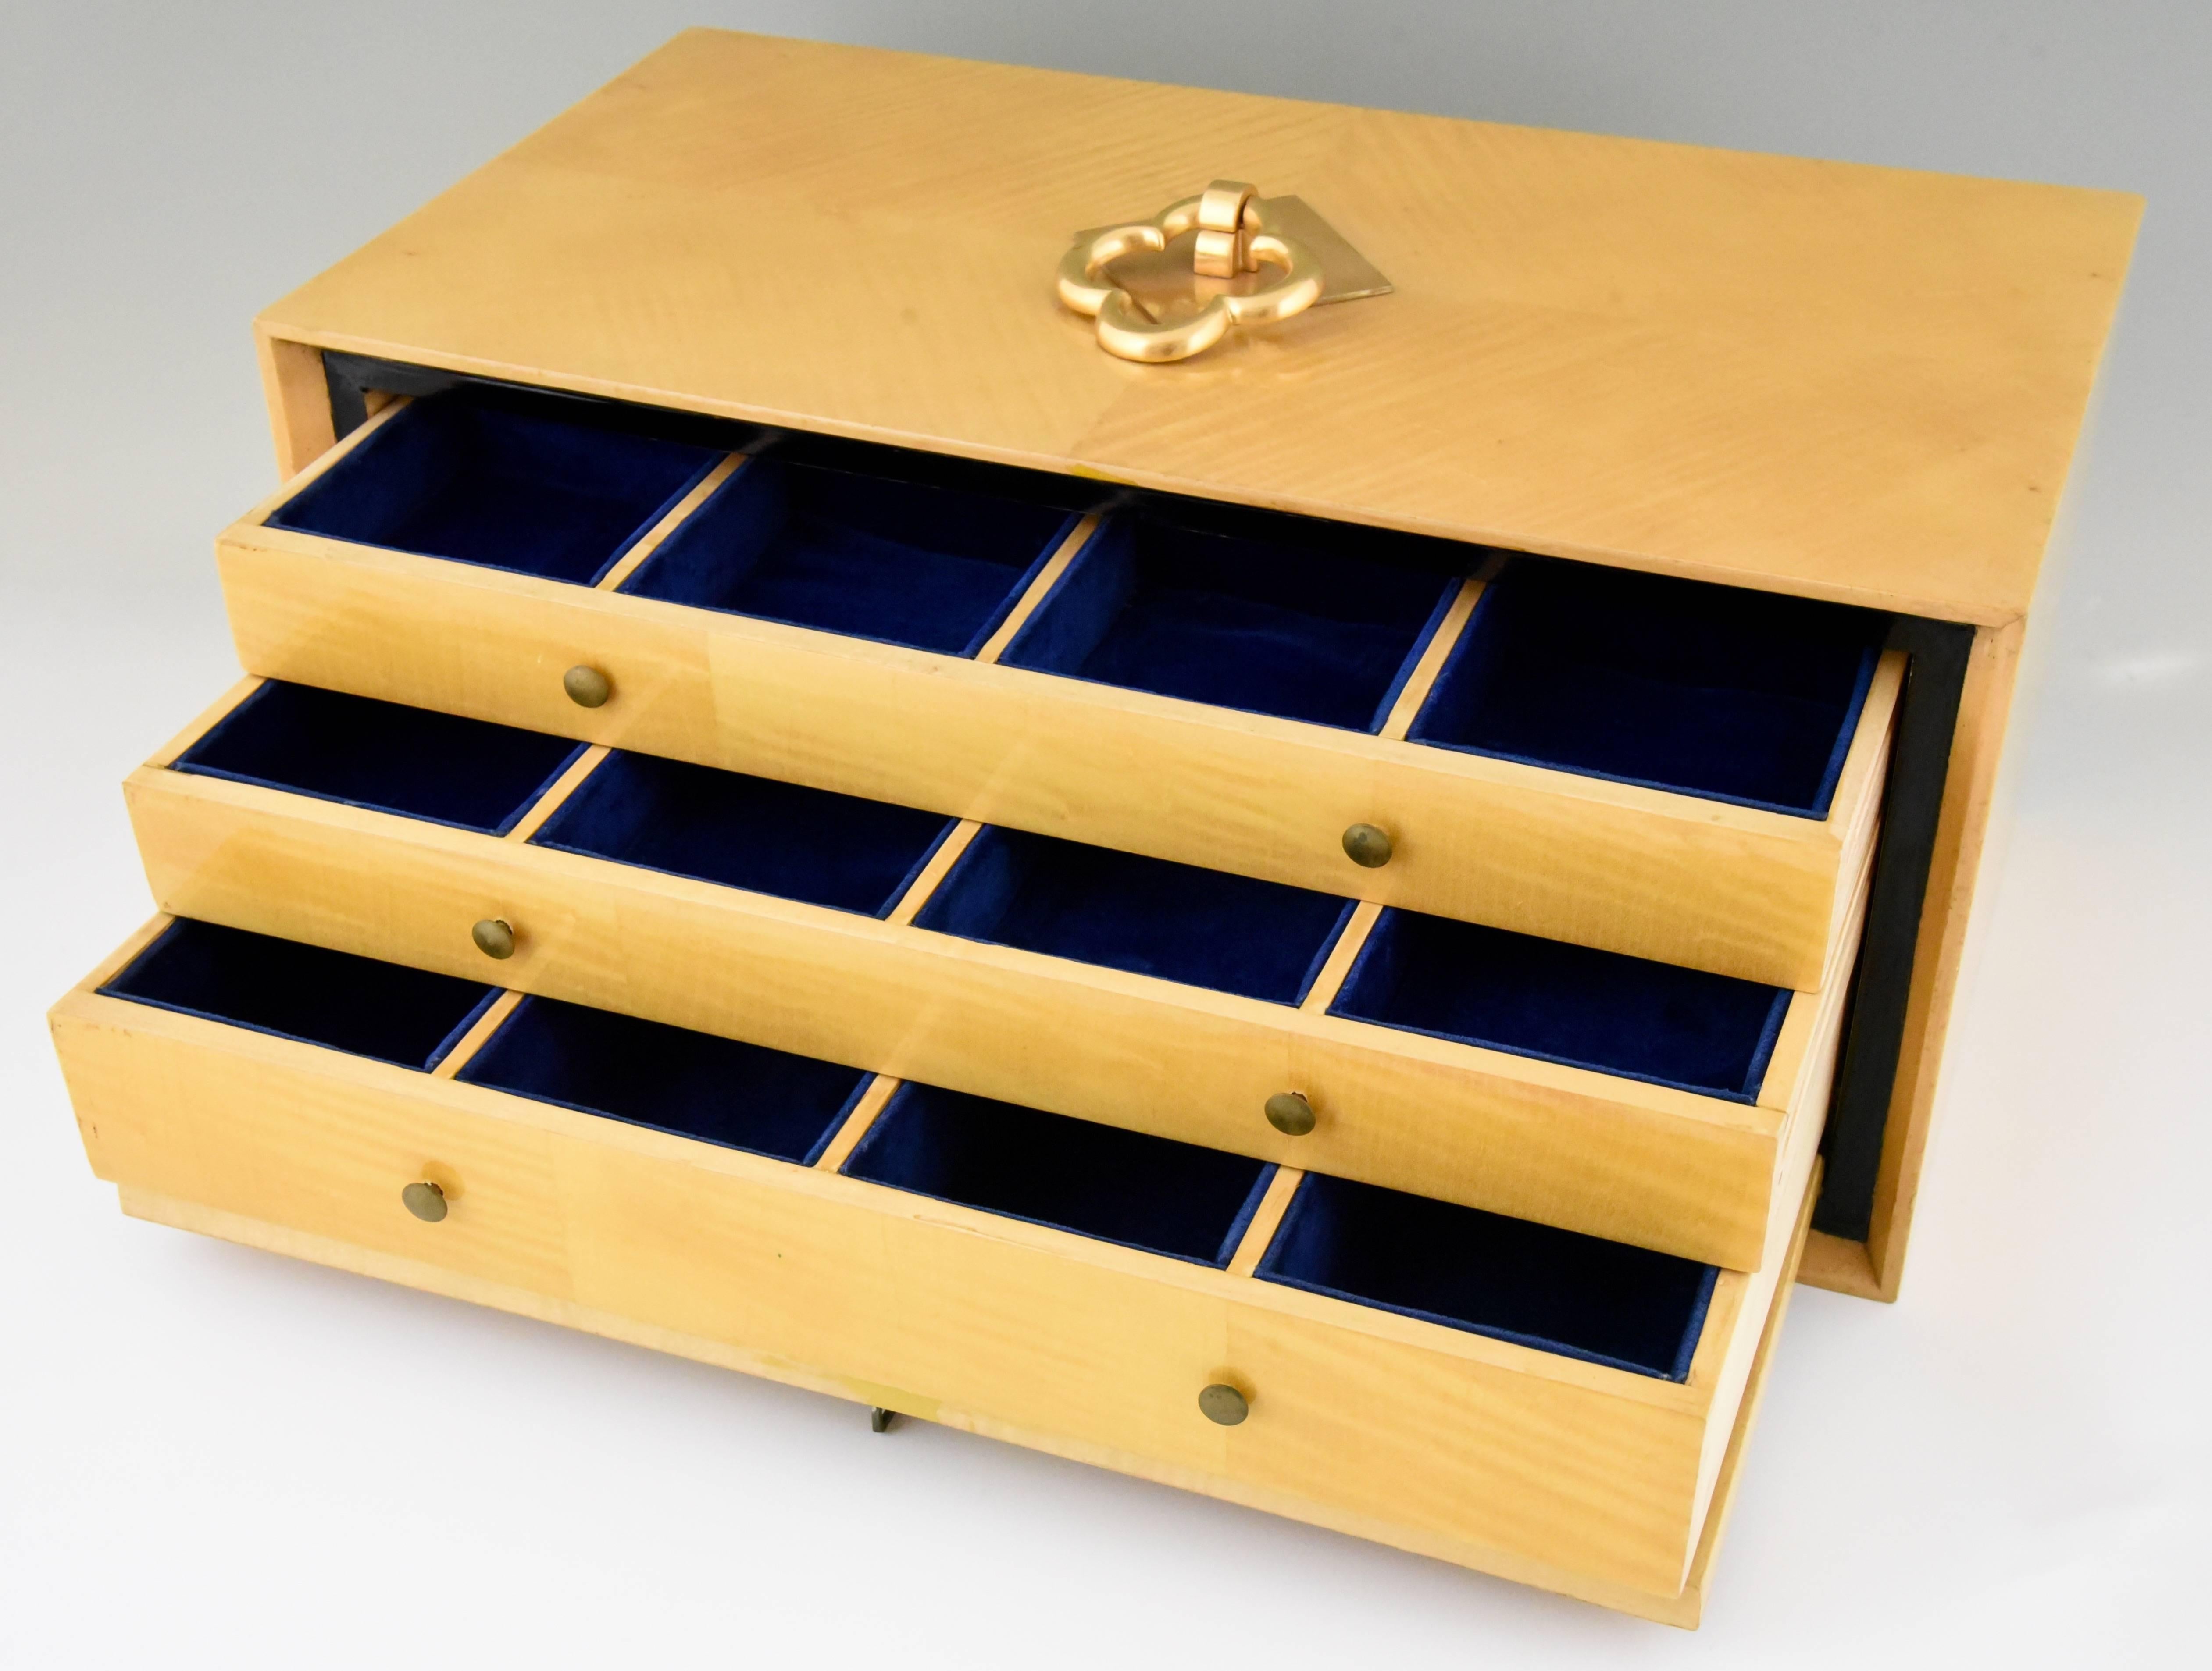 20th Century Art Deco Jewelry Box with Three Drawers, France, 1930